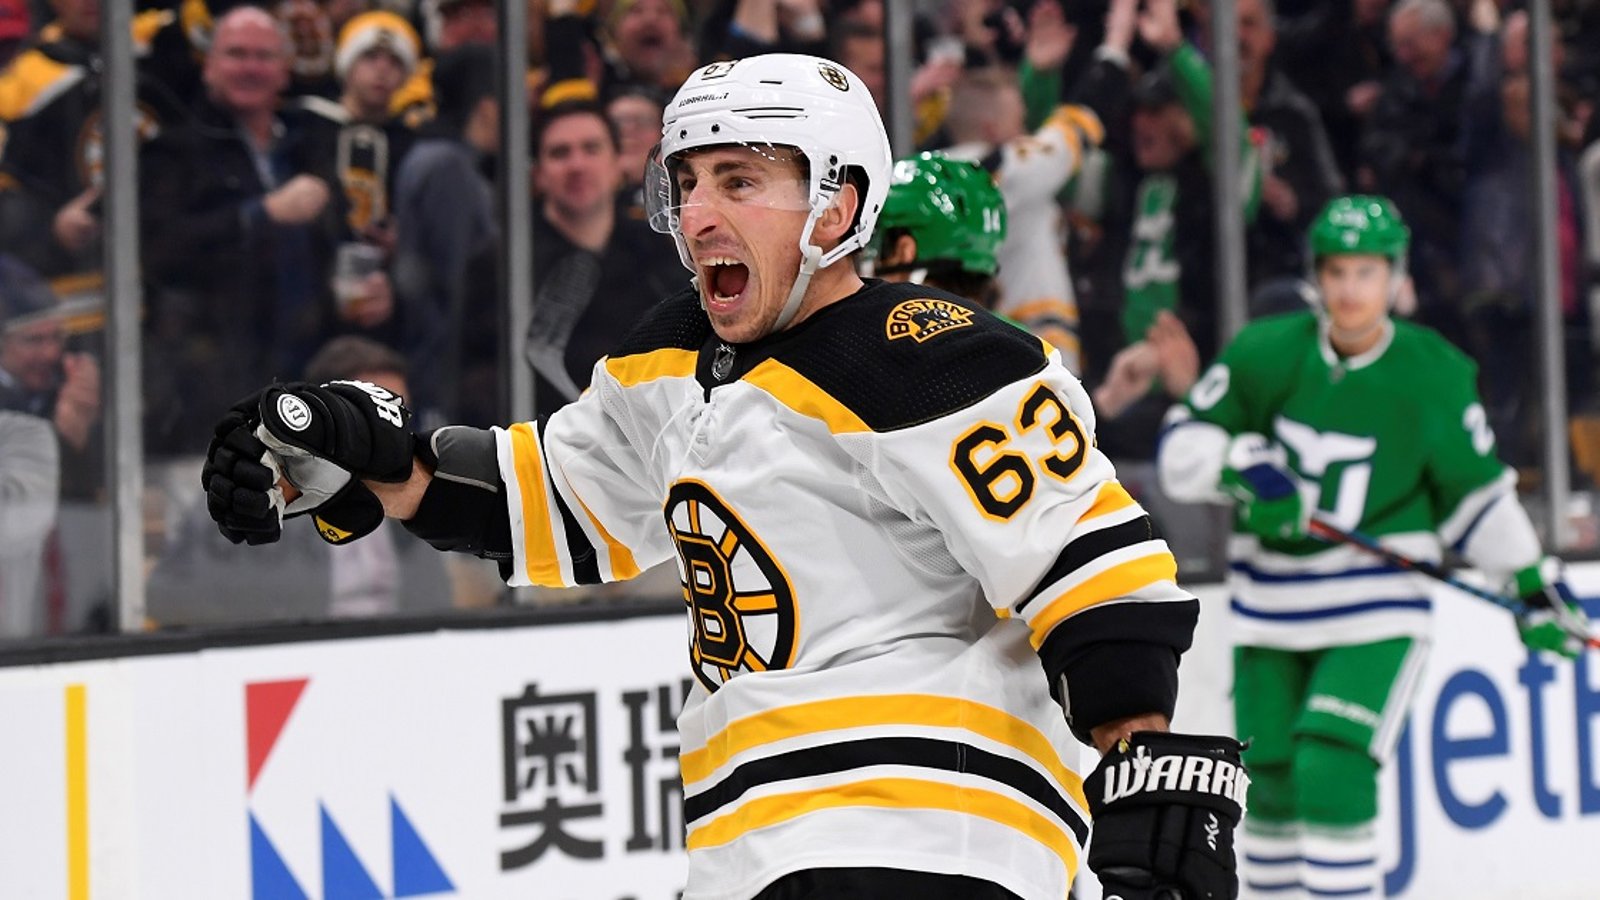 Brad Marchand once again taunts Toronto's fans after his victory “lap” on Friday.